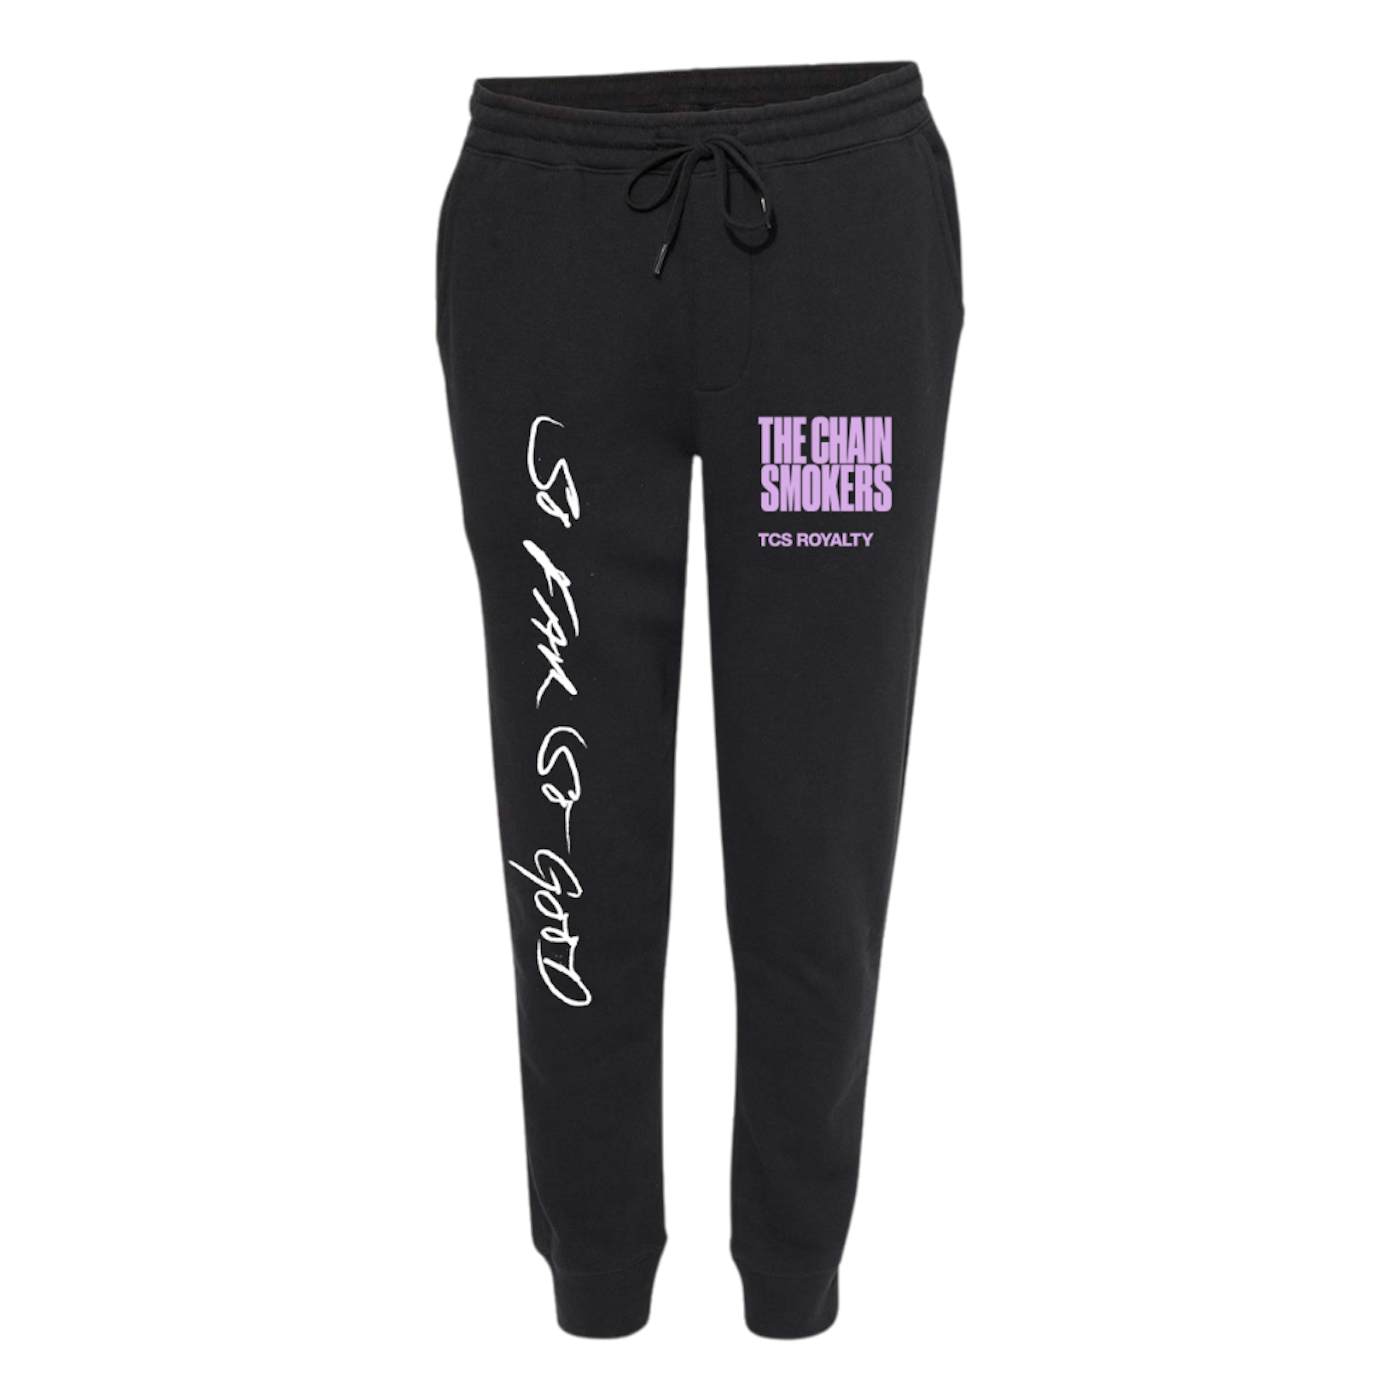 The Chainsmokers TCS Royalty Sweatpants